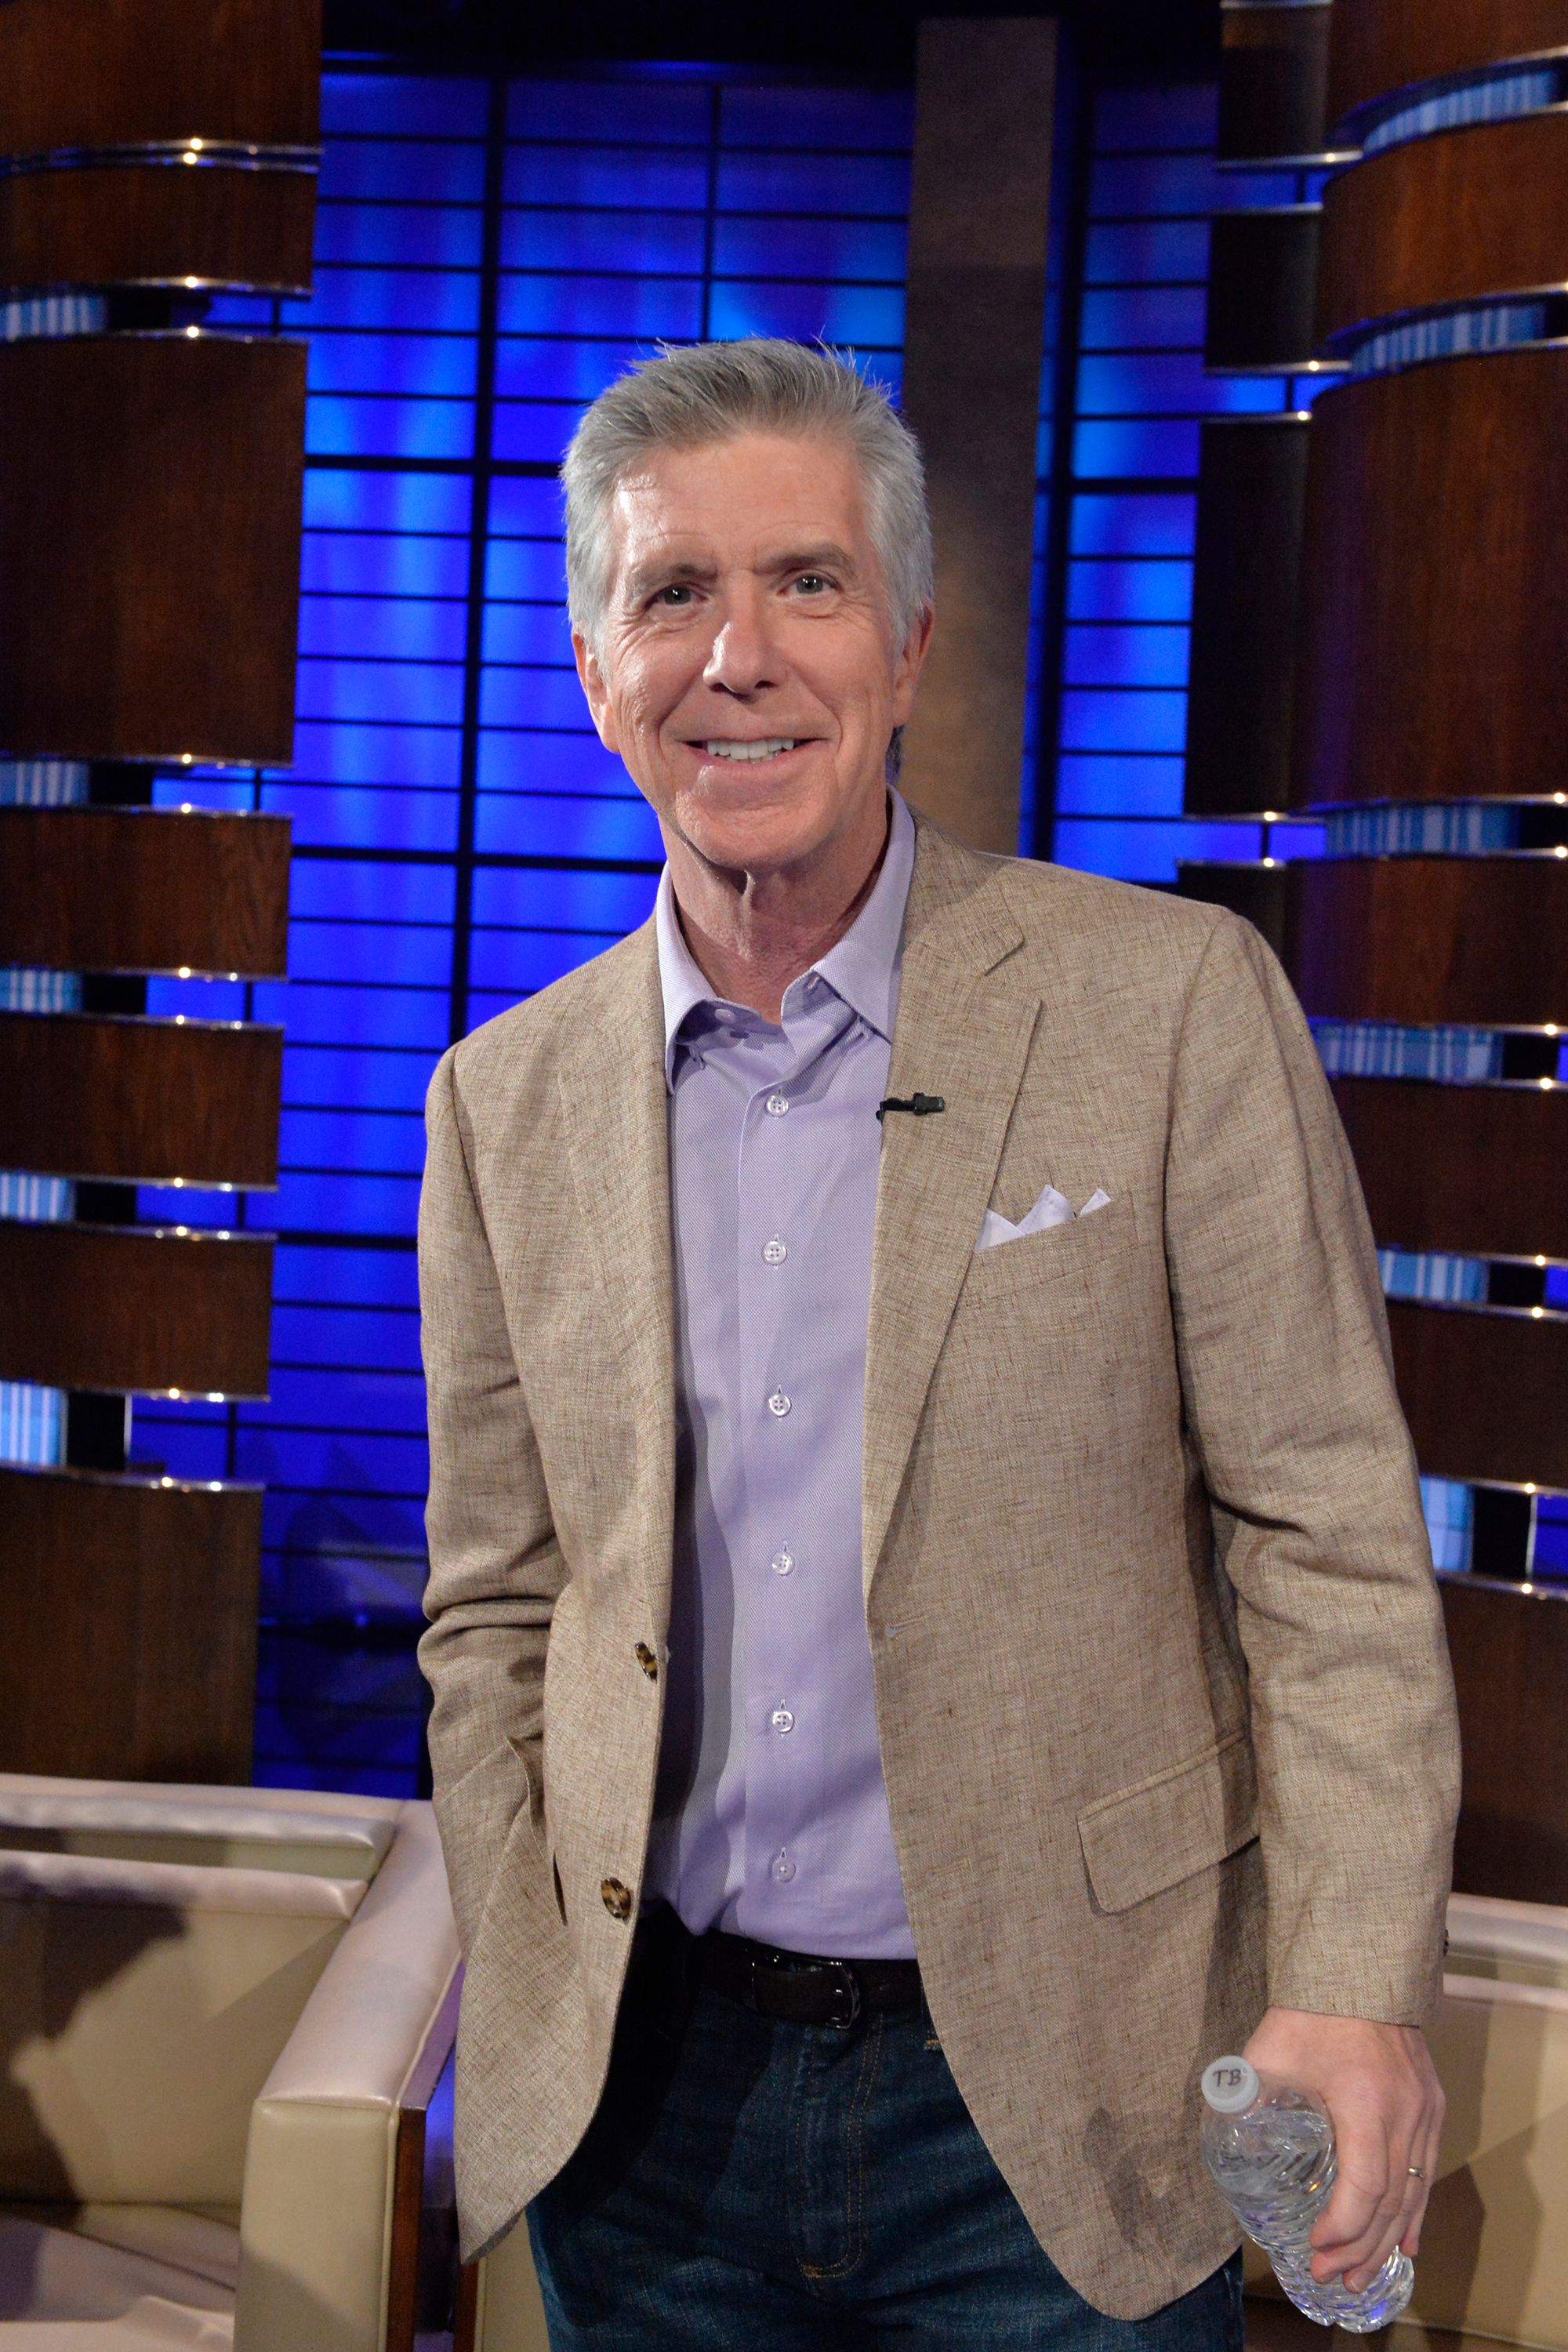 Tom Bergeron on "To Tell The Truth," episode 203 on November 13, 2016 | Photo: Lisa Rose/Walt Disney Television/Getty Images